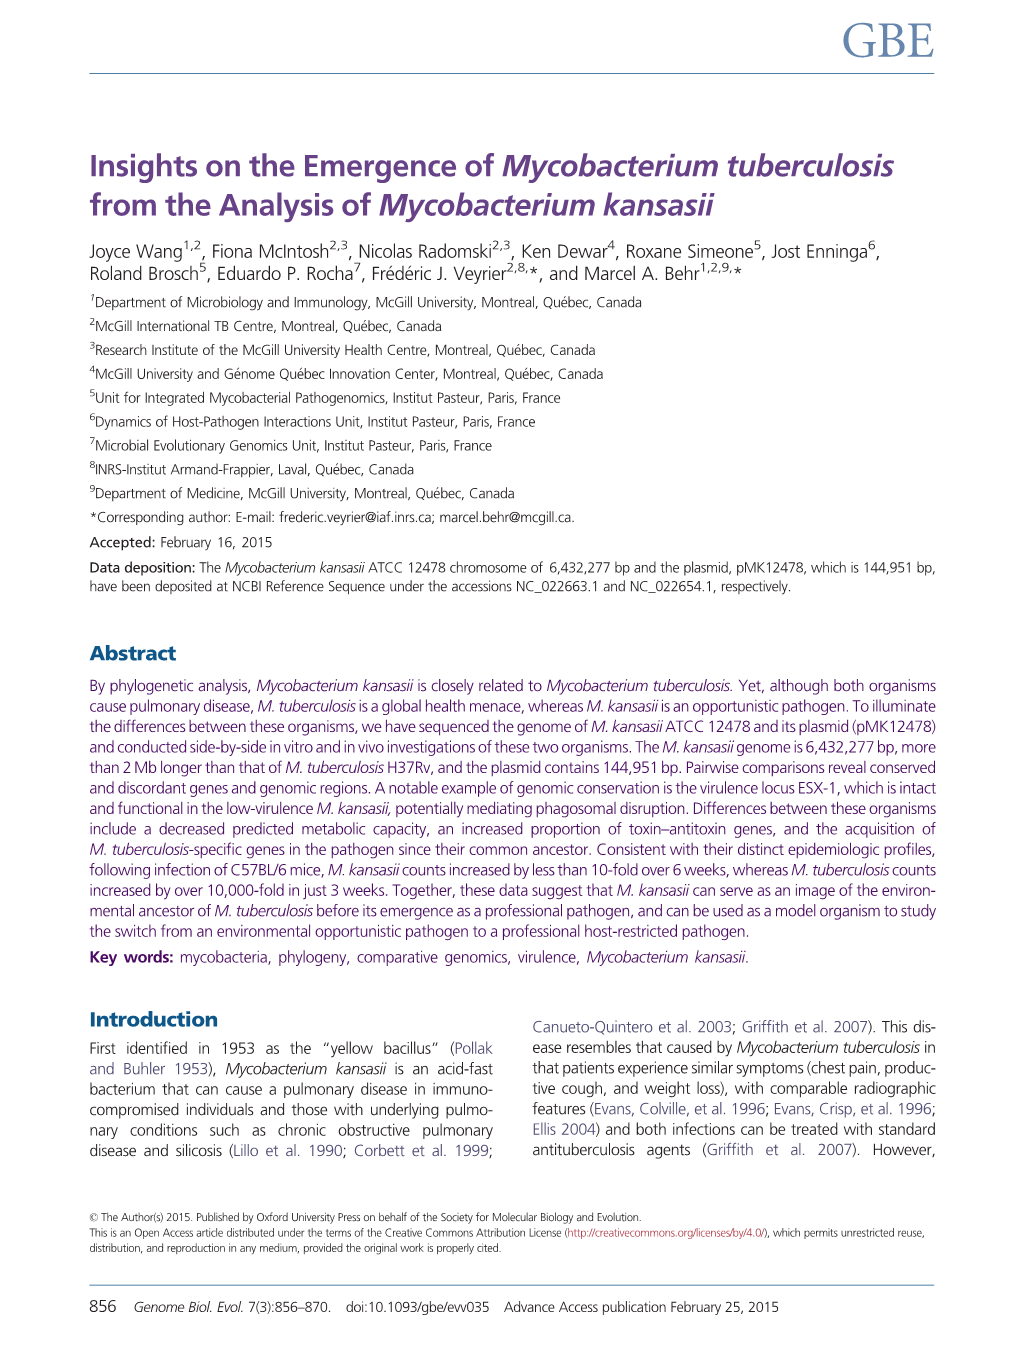 Insights on the Emergence of Mycobacterium Tuberculosis from the Analysis of Mycobacterium Kansasii